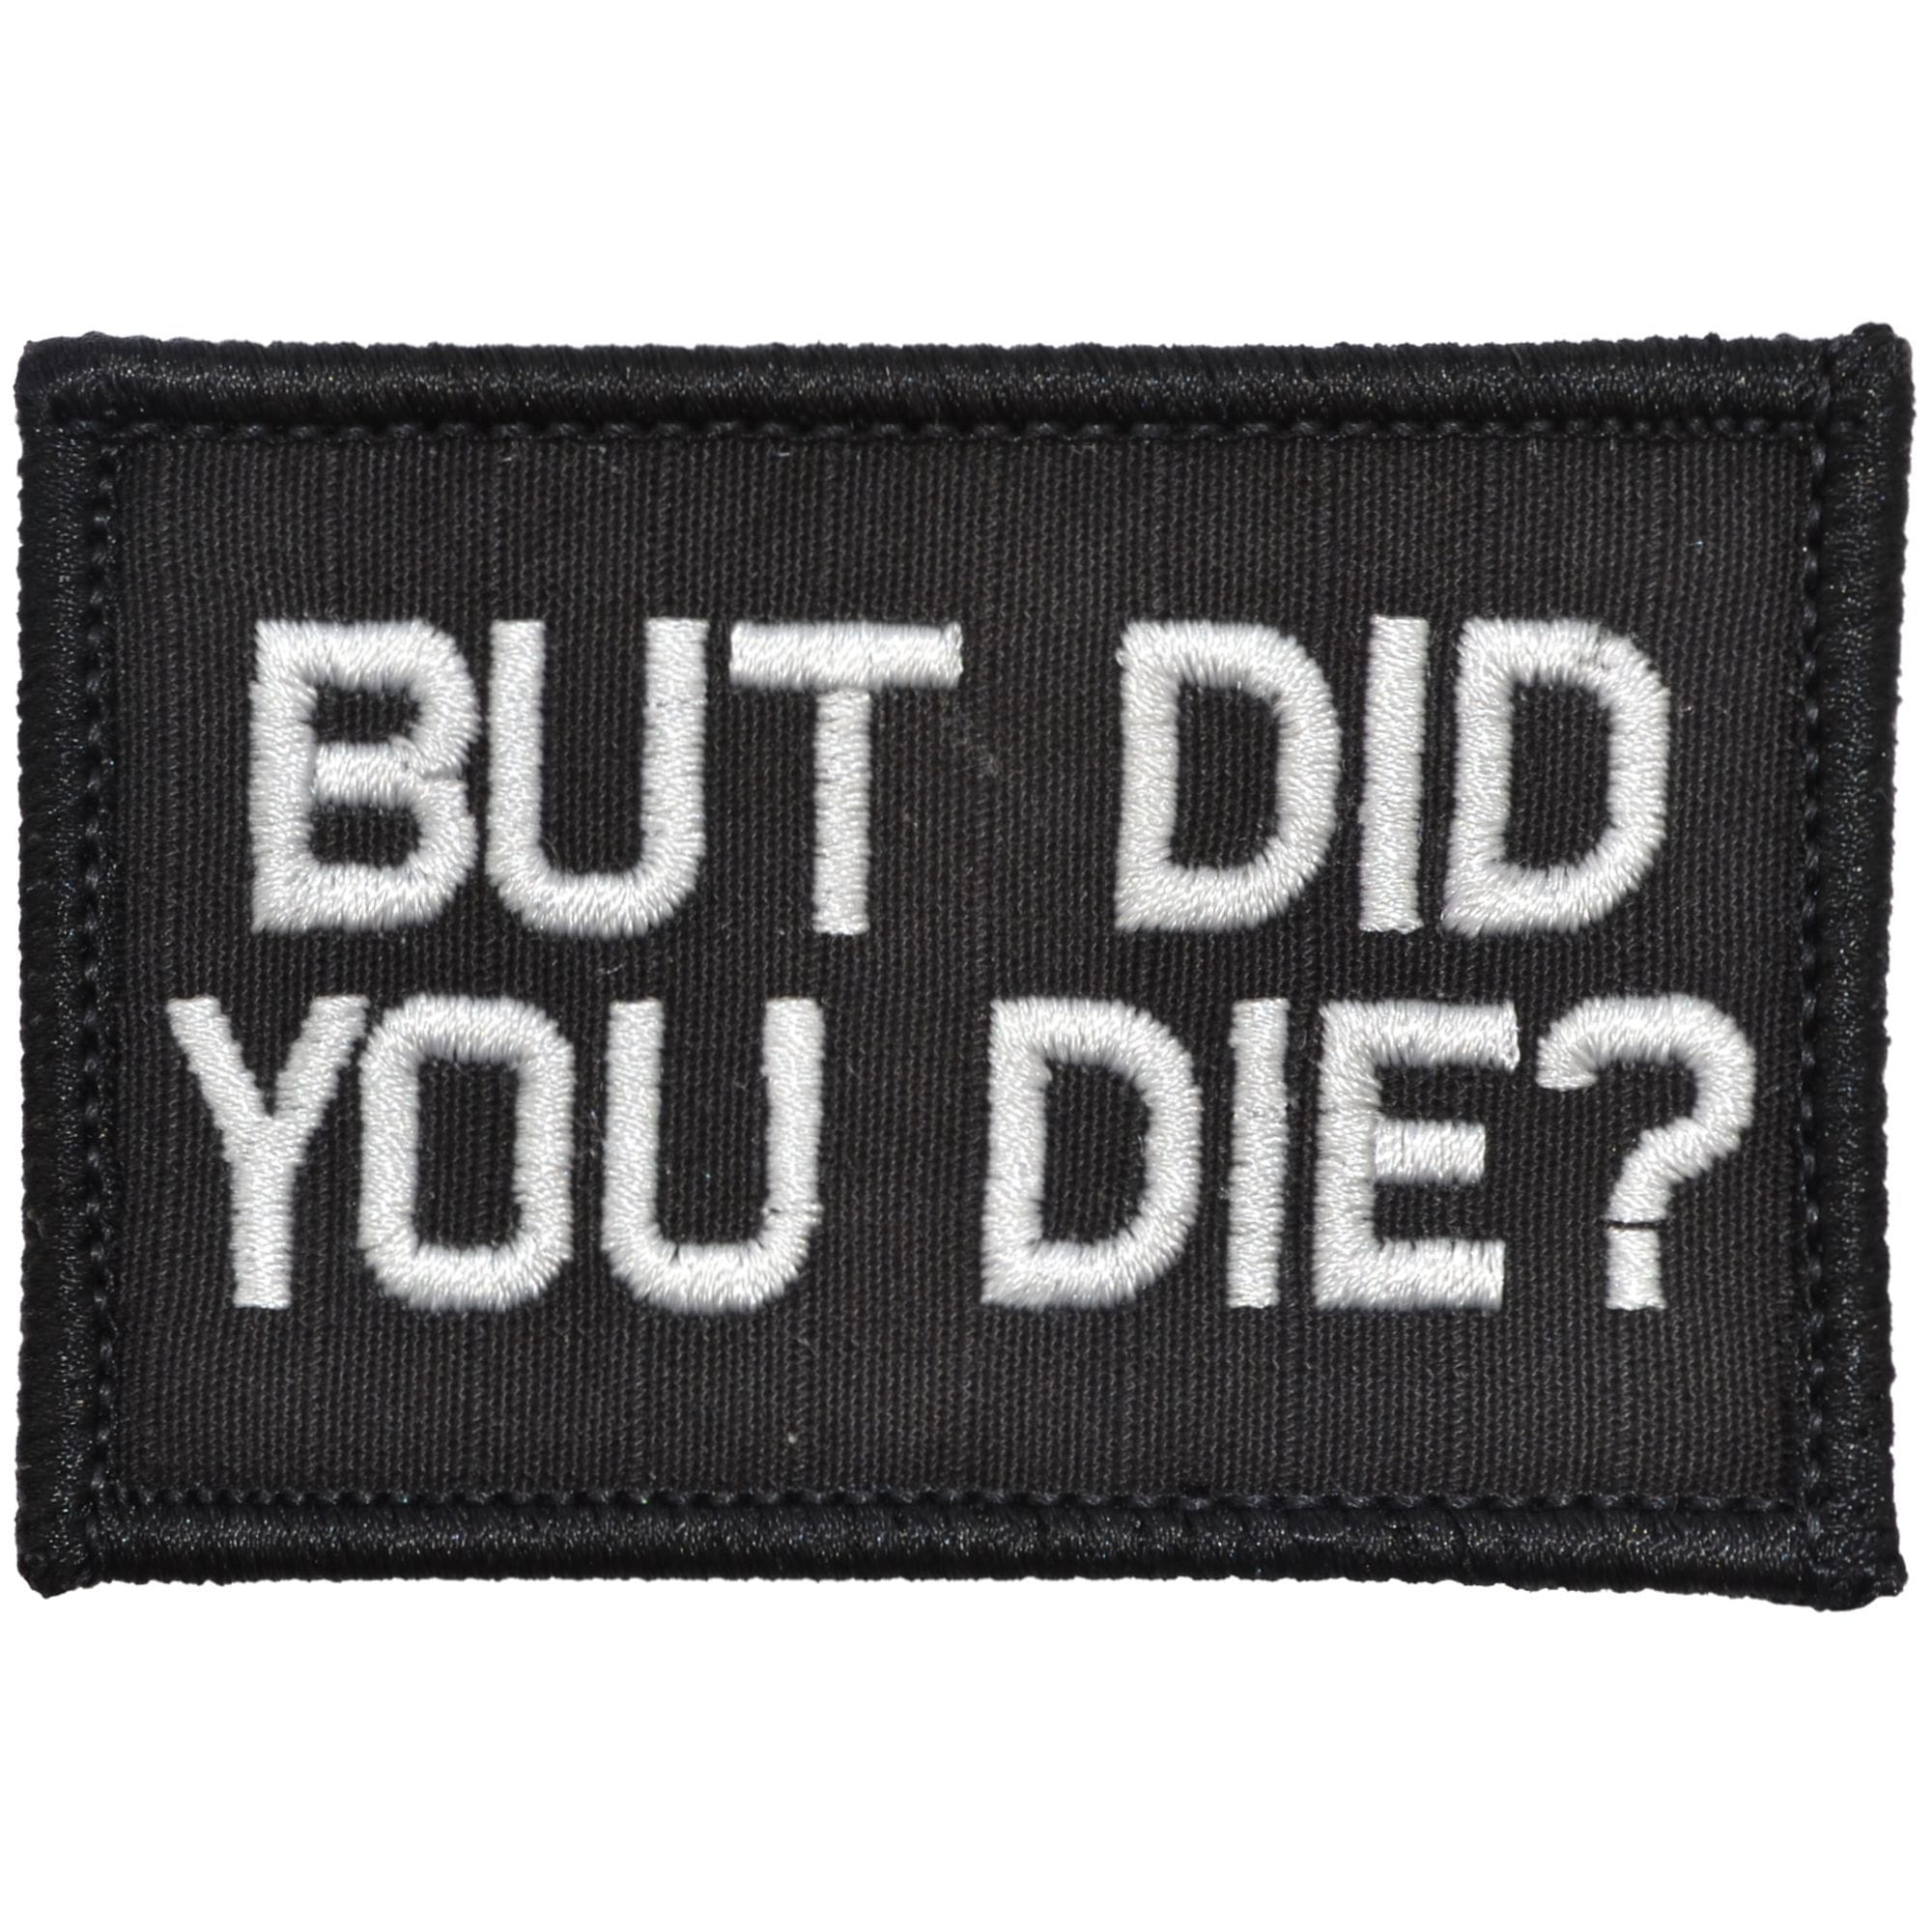 Tactical Gear Junkie Patches Black But Did You Die? - 2x3 Patch